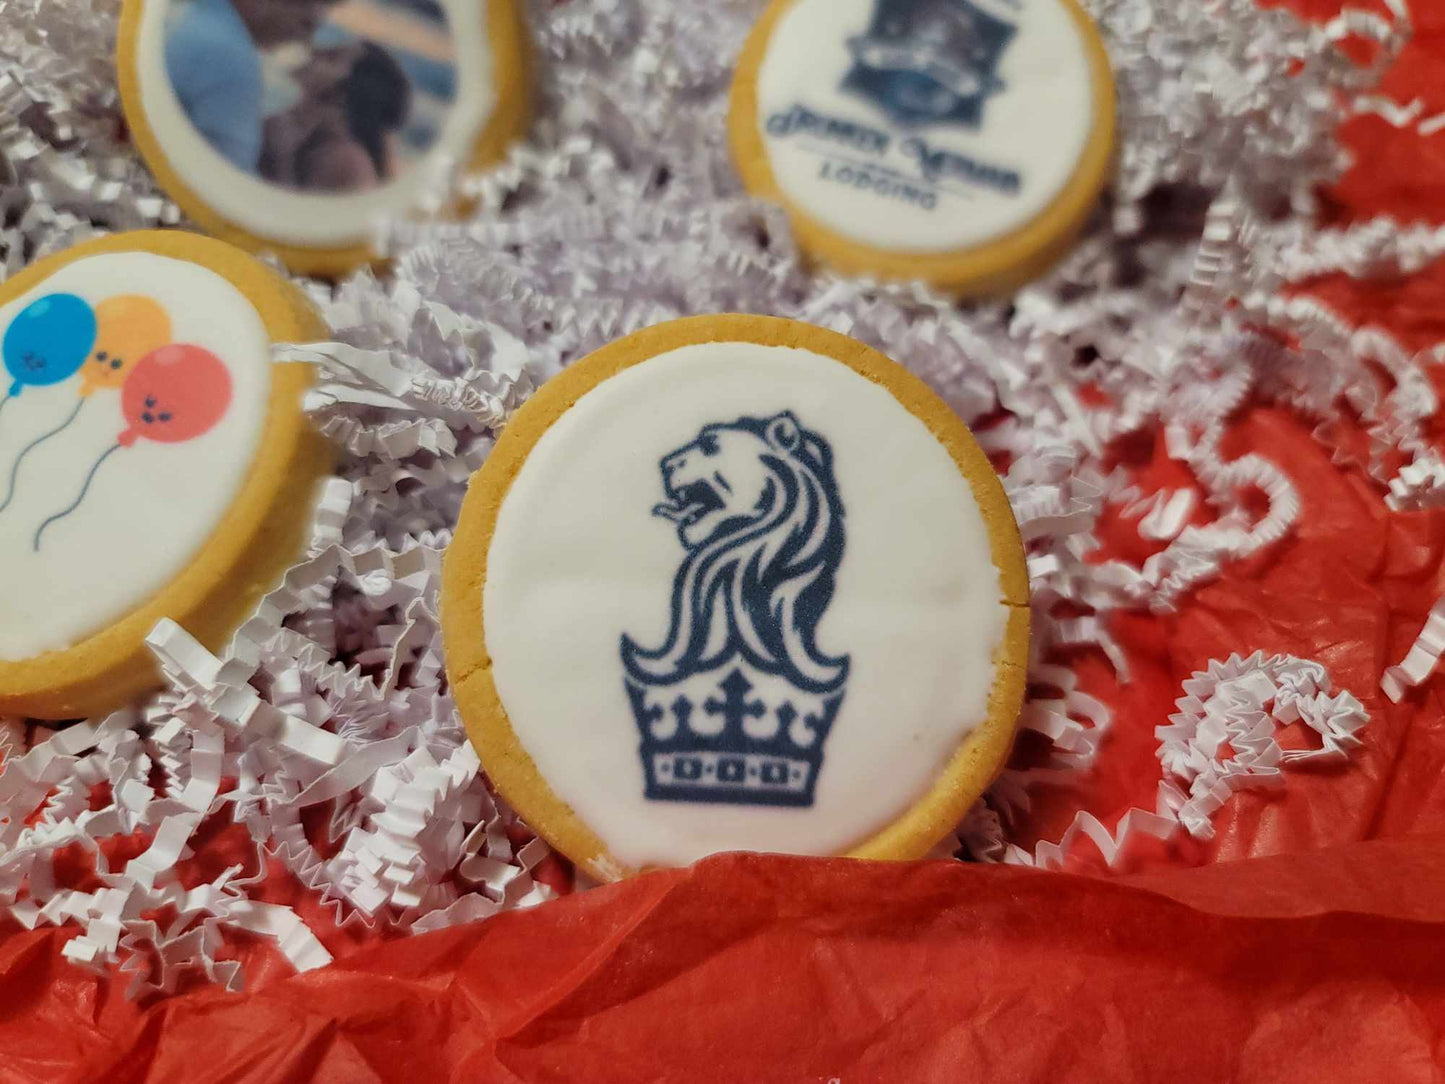 Logo Cookies Printed with Any Image, Logo or Photo | Customized Logo Images | Custom Logo Cookies | Corporate favors | Custom Party Favor